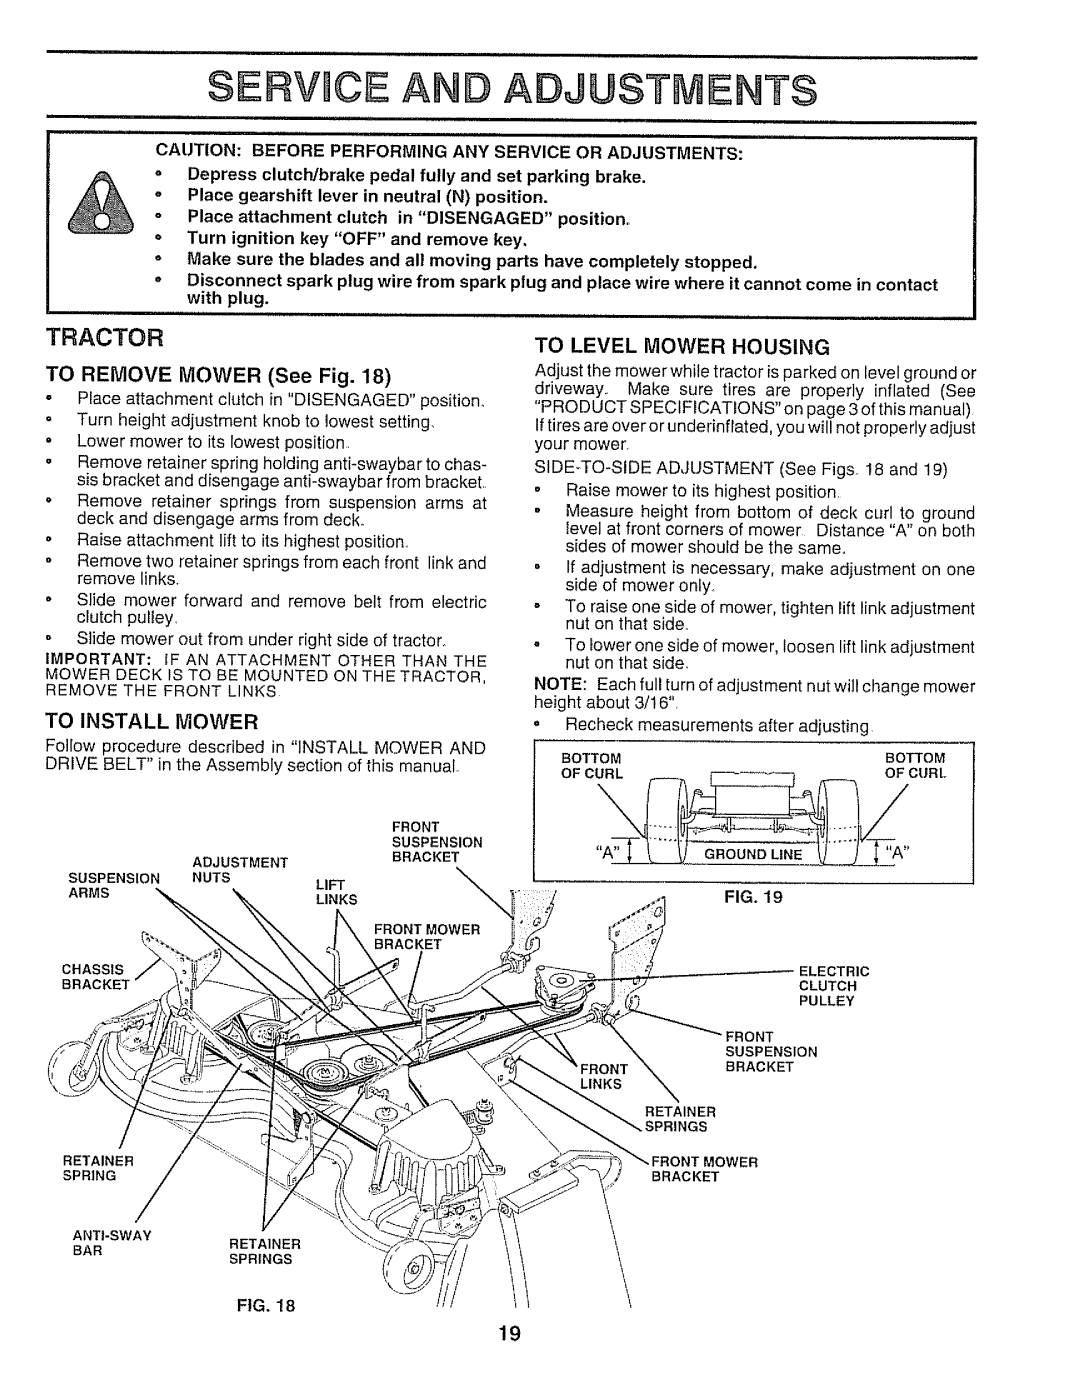 Sears 917.250551 manual Serwce An Adjustments, Tractor, TO REMOVE MOWER See Fig, To Install, To Level Mower Housing 